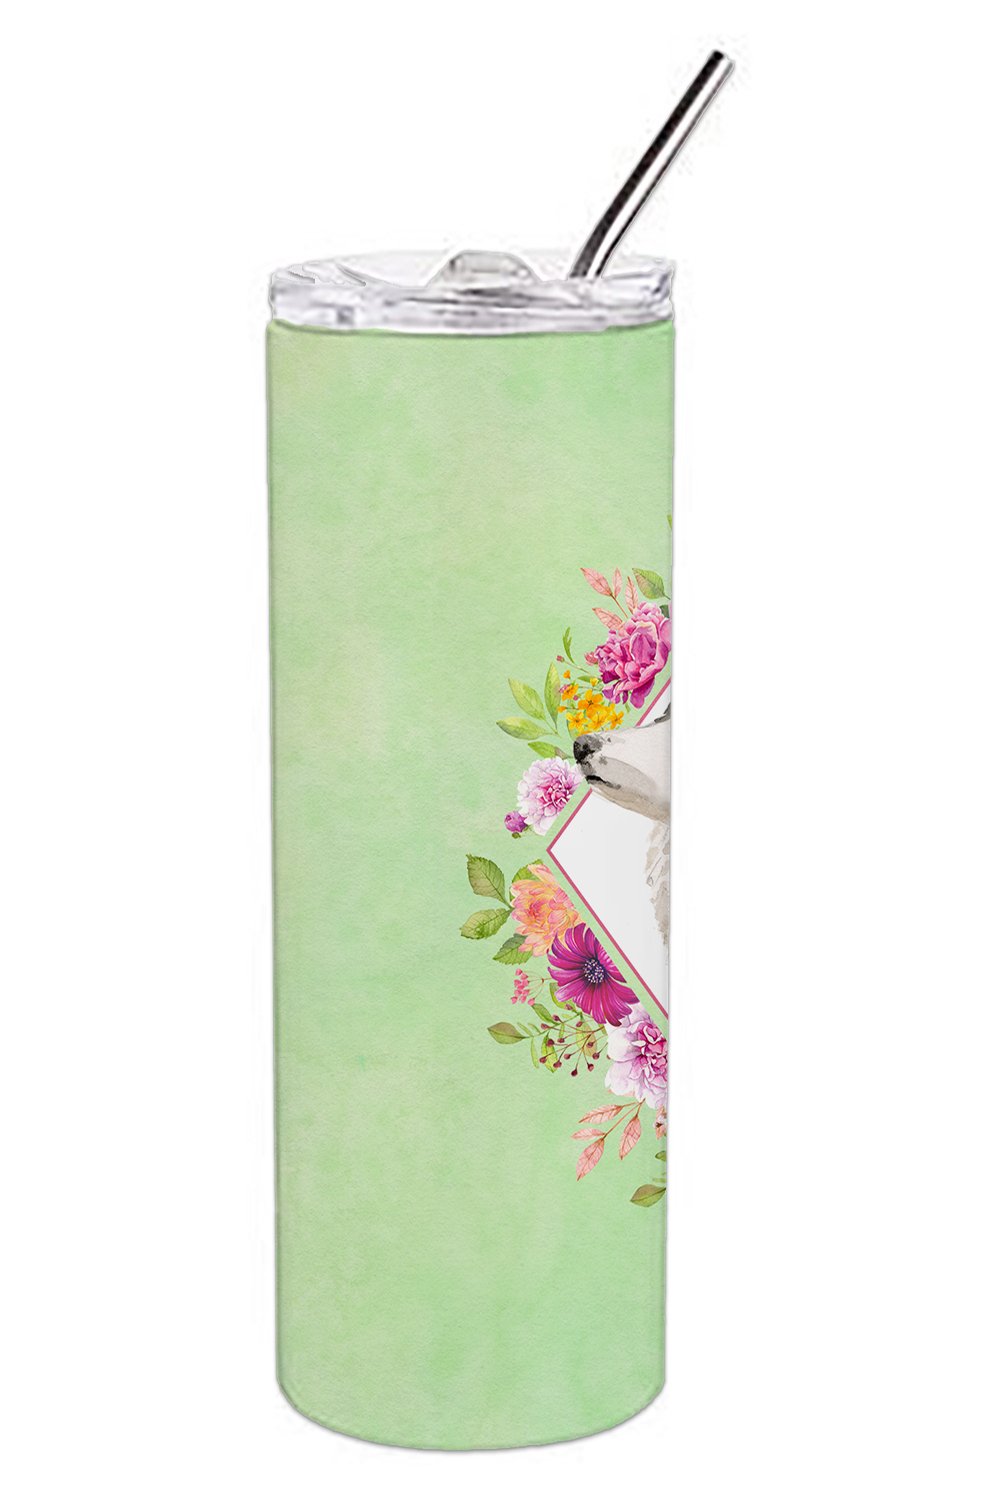 Border Collie Green Flowers Double Walled Stainless Steel 20 oz Skinny Tumbler CK4418TBL20 by Caroline's Treasures